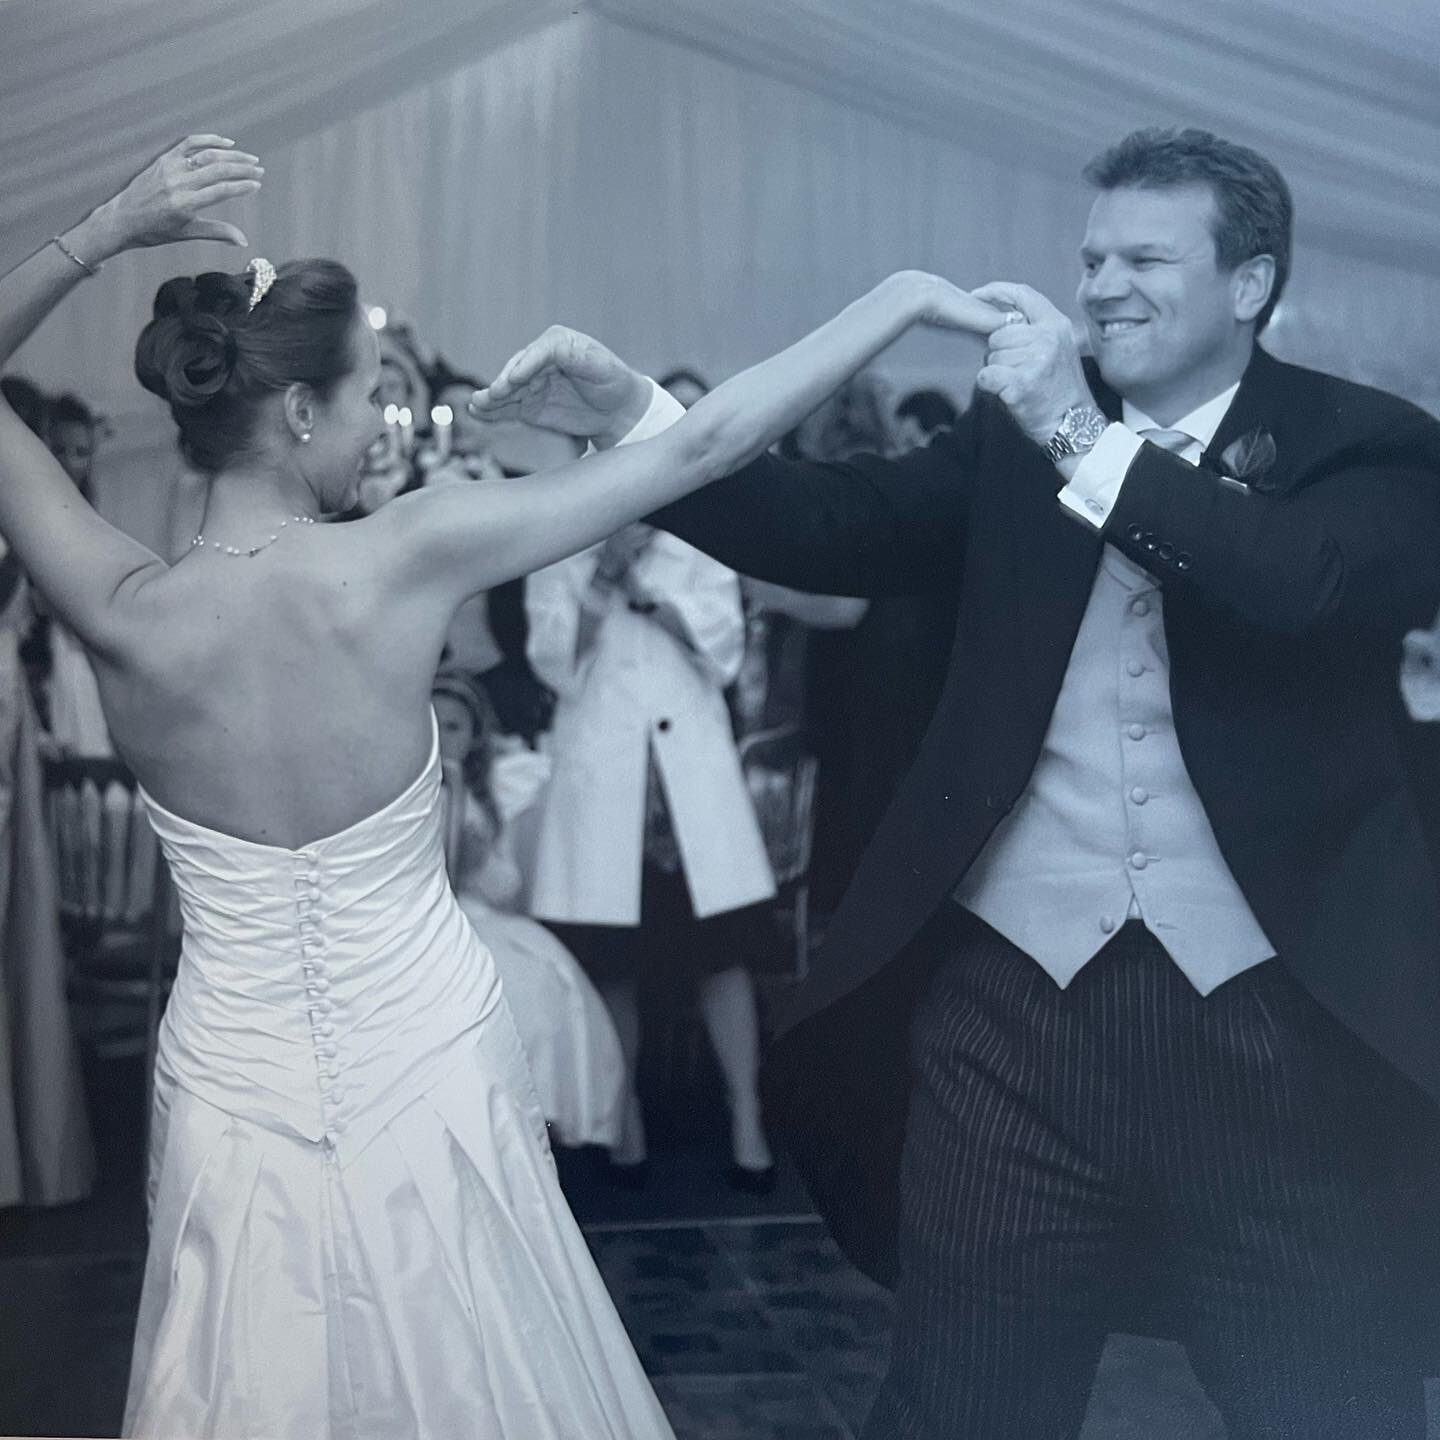 16 years ago we danced the night away ❤️ and we are still dancing 🥰 and I tell you what, their is never a dull moment being your wife 🤣😘 you certainly keep me on my toes darling Sigh xxx